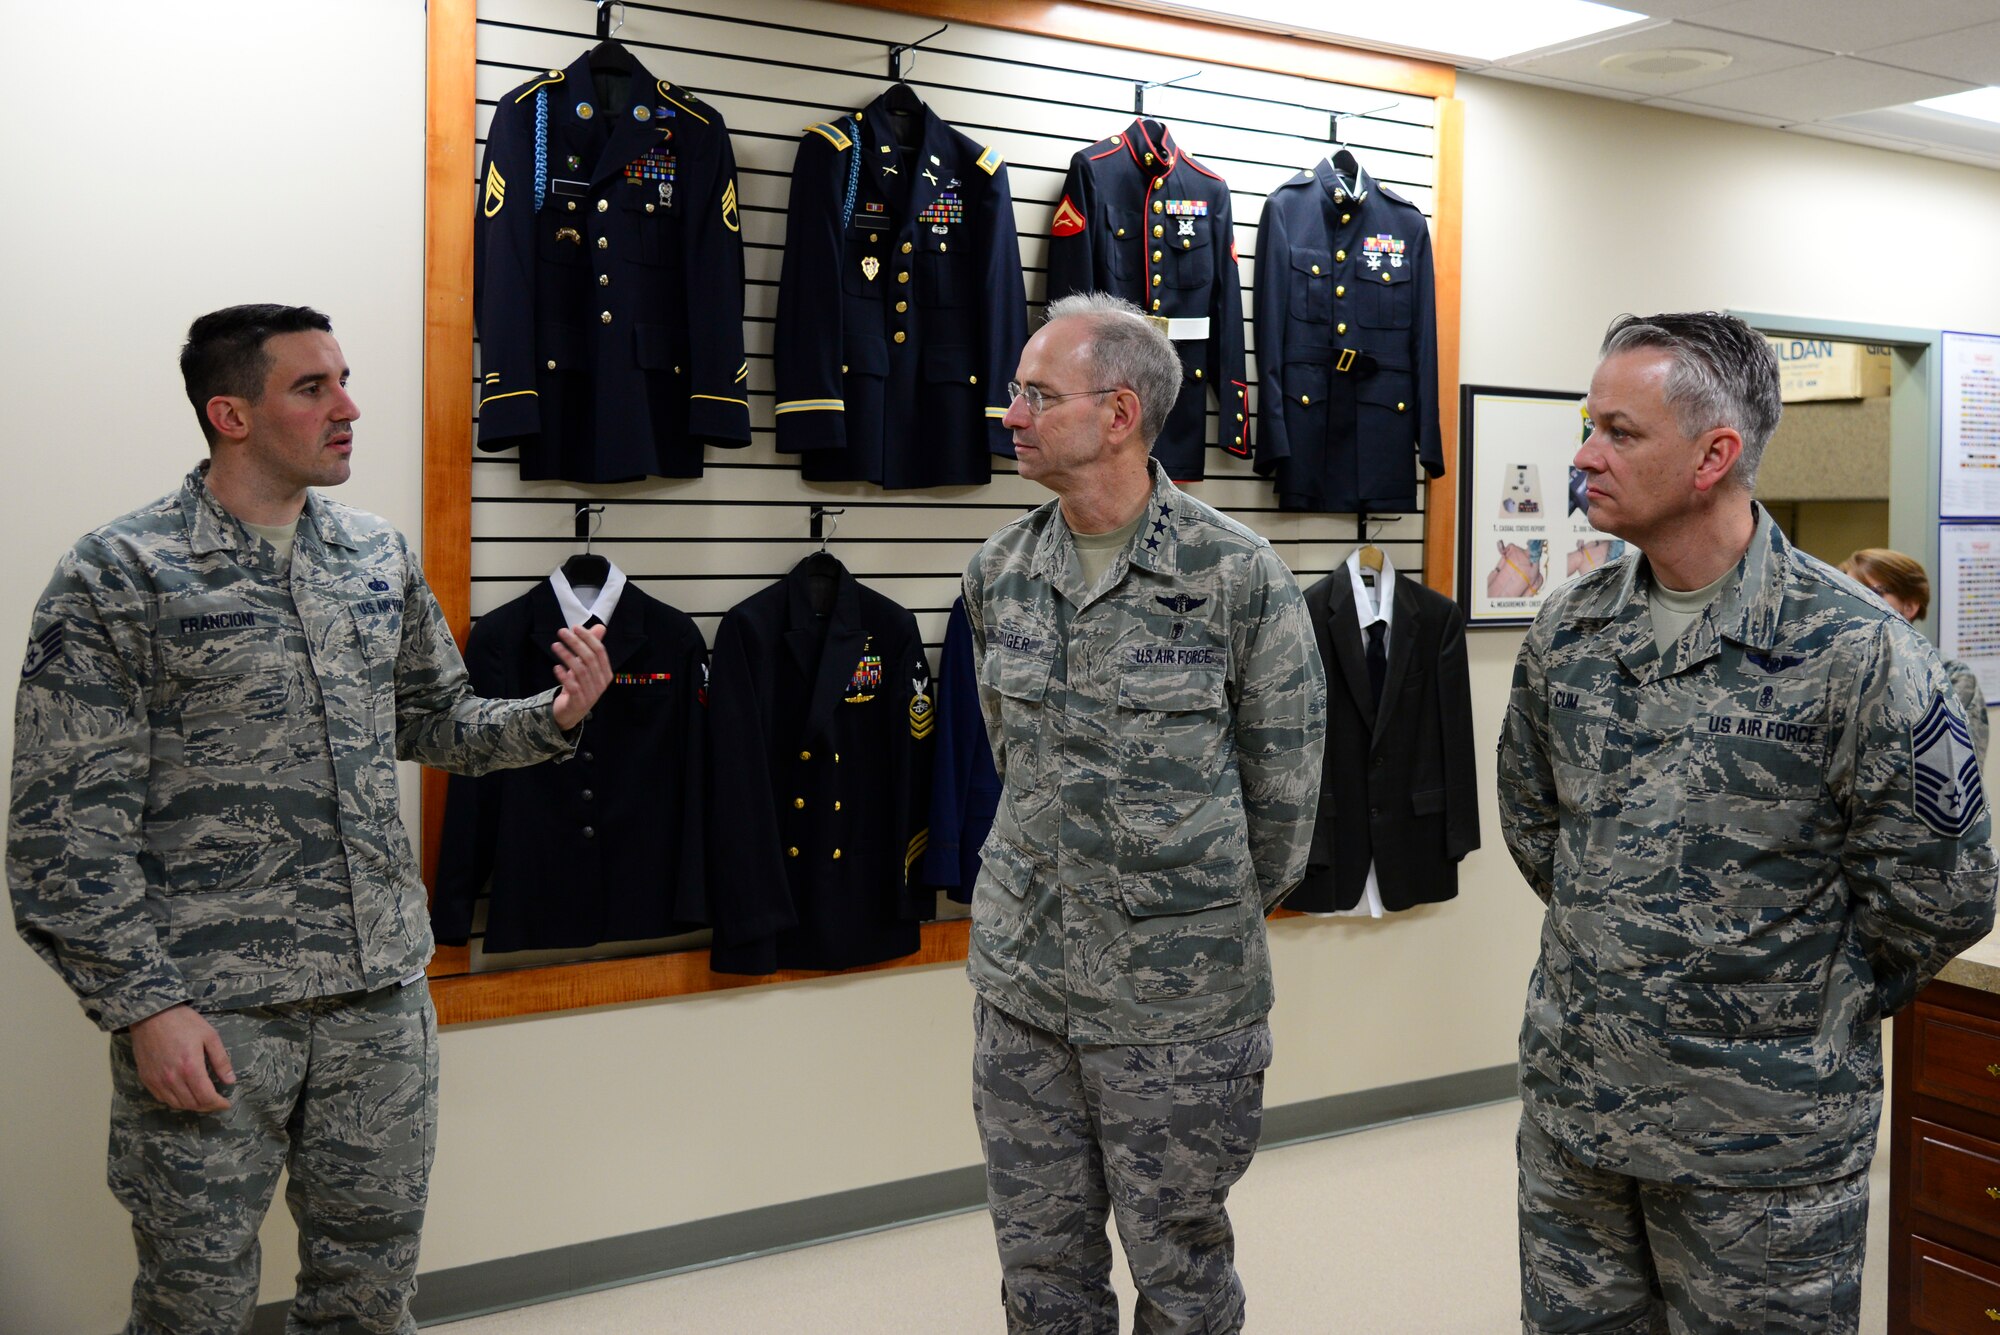 Staff Sgt. Giuseppe Francioni, Air Force Mortuary Affairs Operations NCO in charge of the Joint Services Uniforms Section, briefs Air Force Surgeon General Lt. Gen. (Dr.) Mark Ediger and Chief Master Sgt. George Cum, Air Force Surgeon General medical enlisted force and enlisted corps chief, during an orientation of AFMAO March 9, 2018, at Dover Air Force Base, Del. Airmen assigned to AFMAO briefed Ediger about how they care for the remains of fallen service members with dignity and respect. (U.S. Air Force photo by Staff Sgt. Aaron J. Jenne)